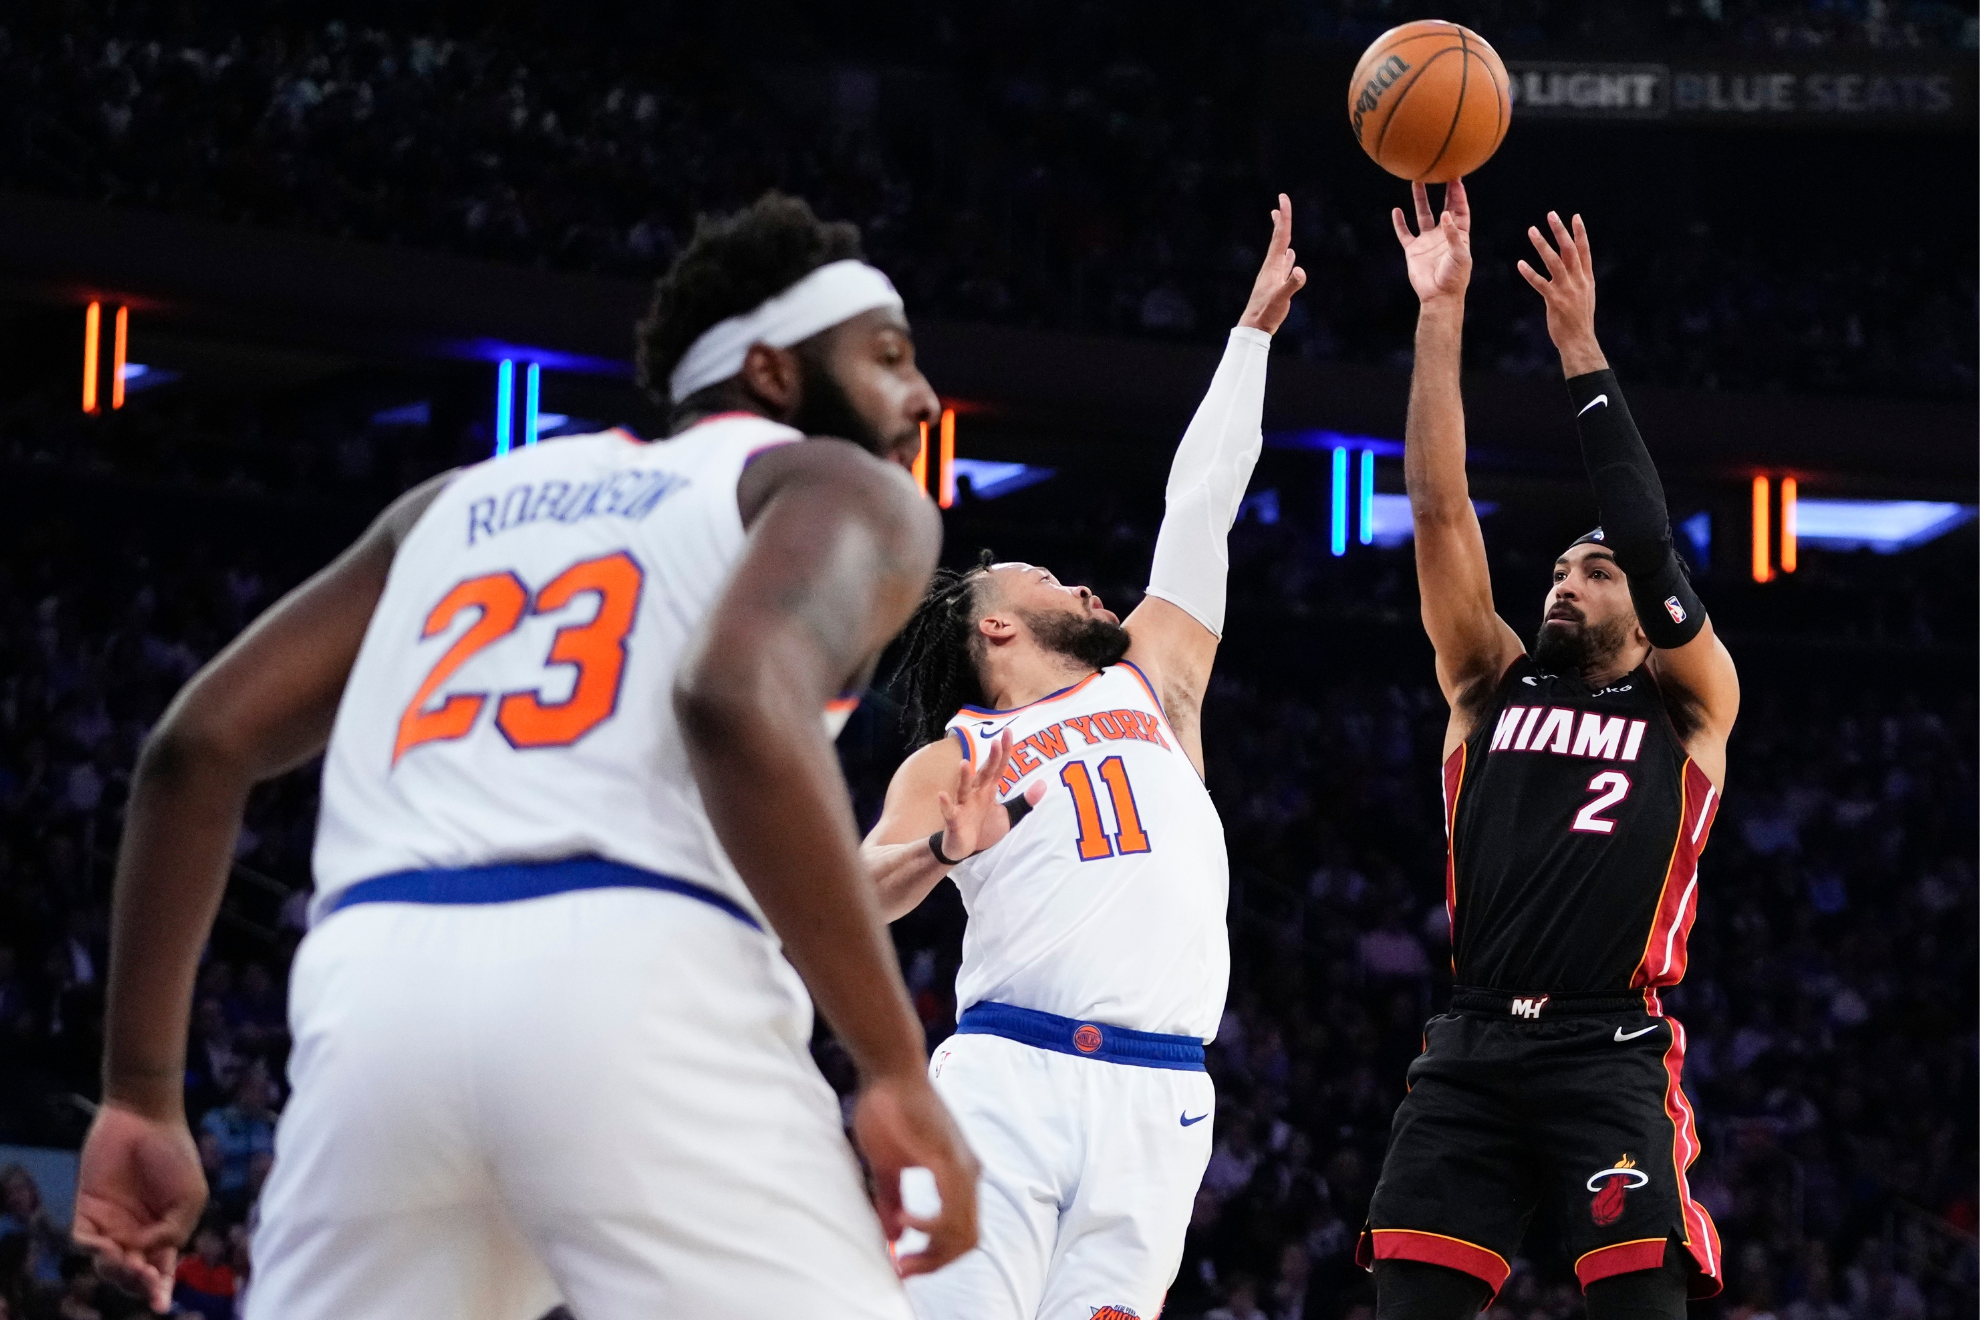 The Knicks and Heat battled it out at MSG.